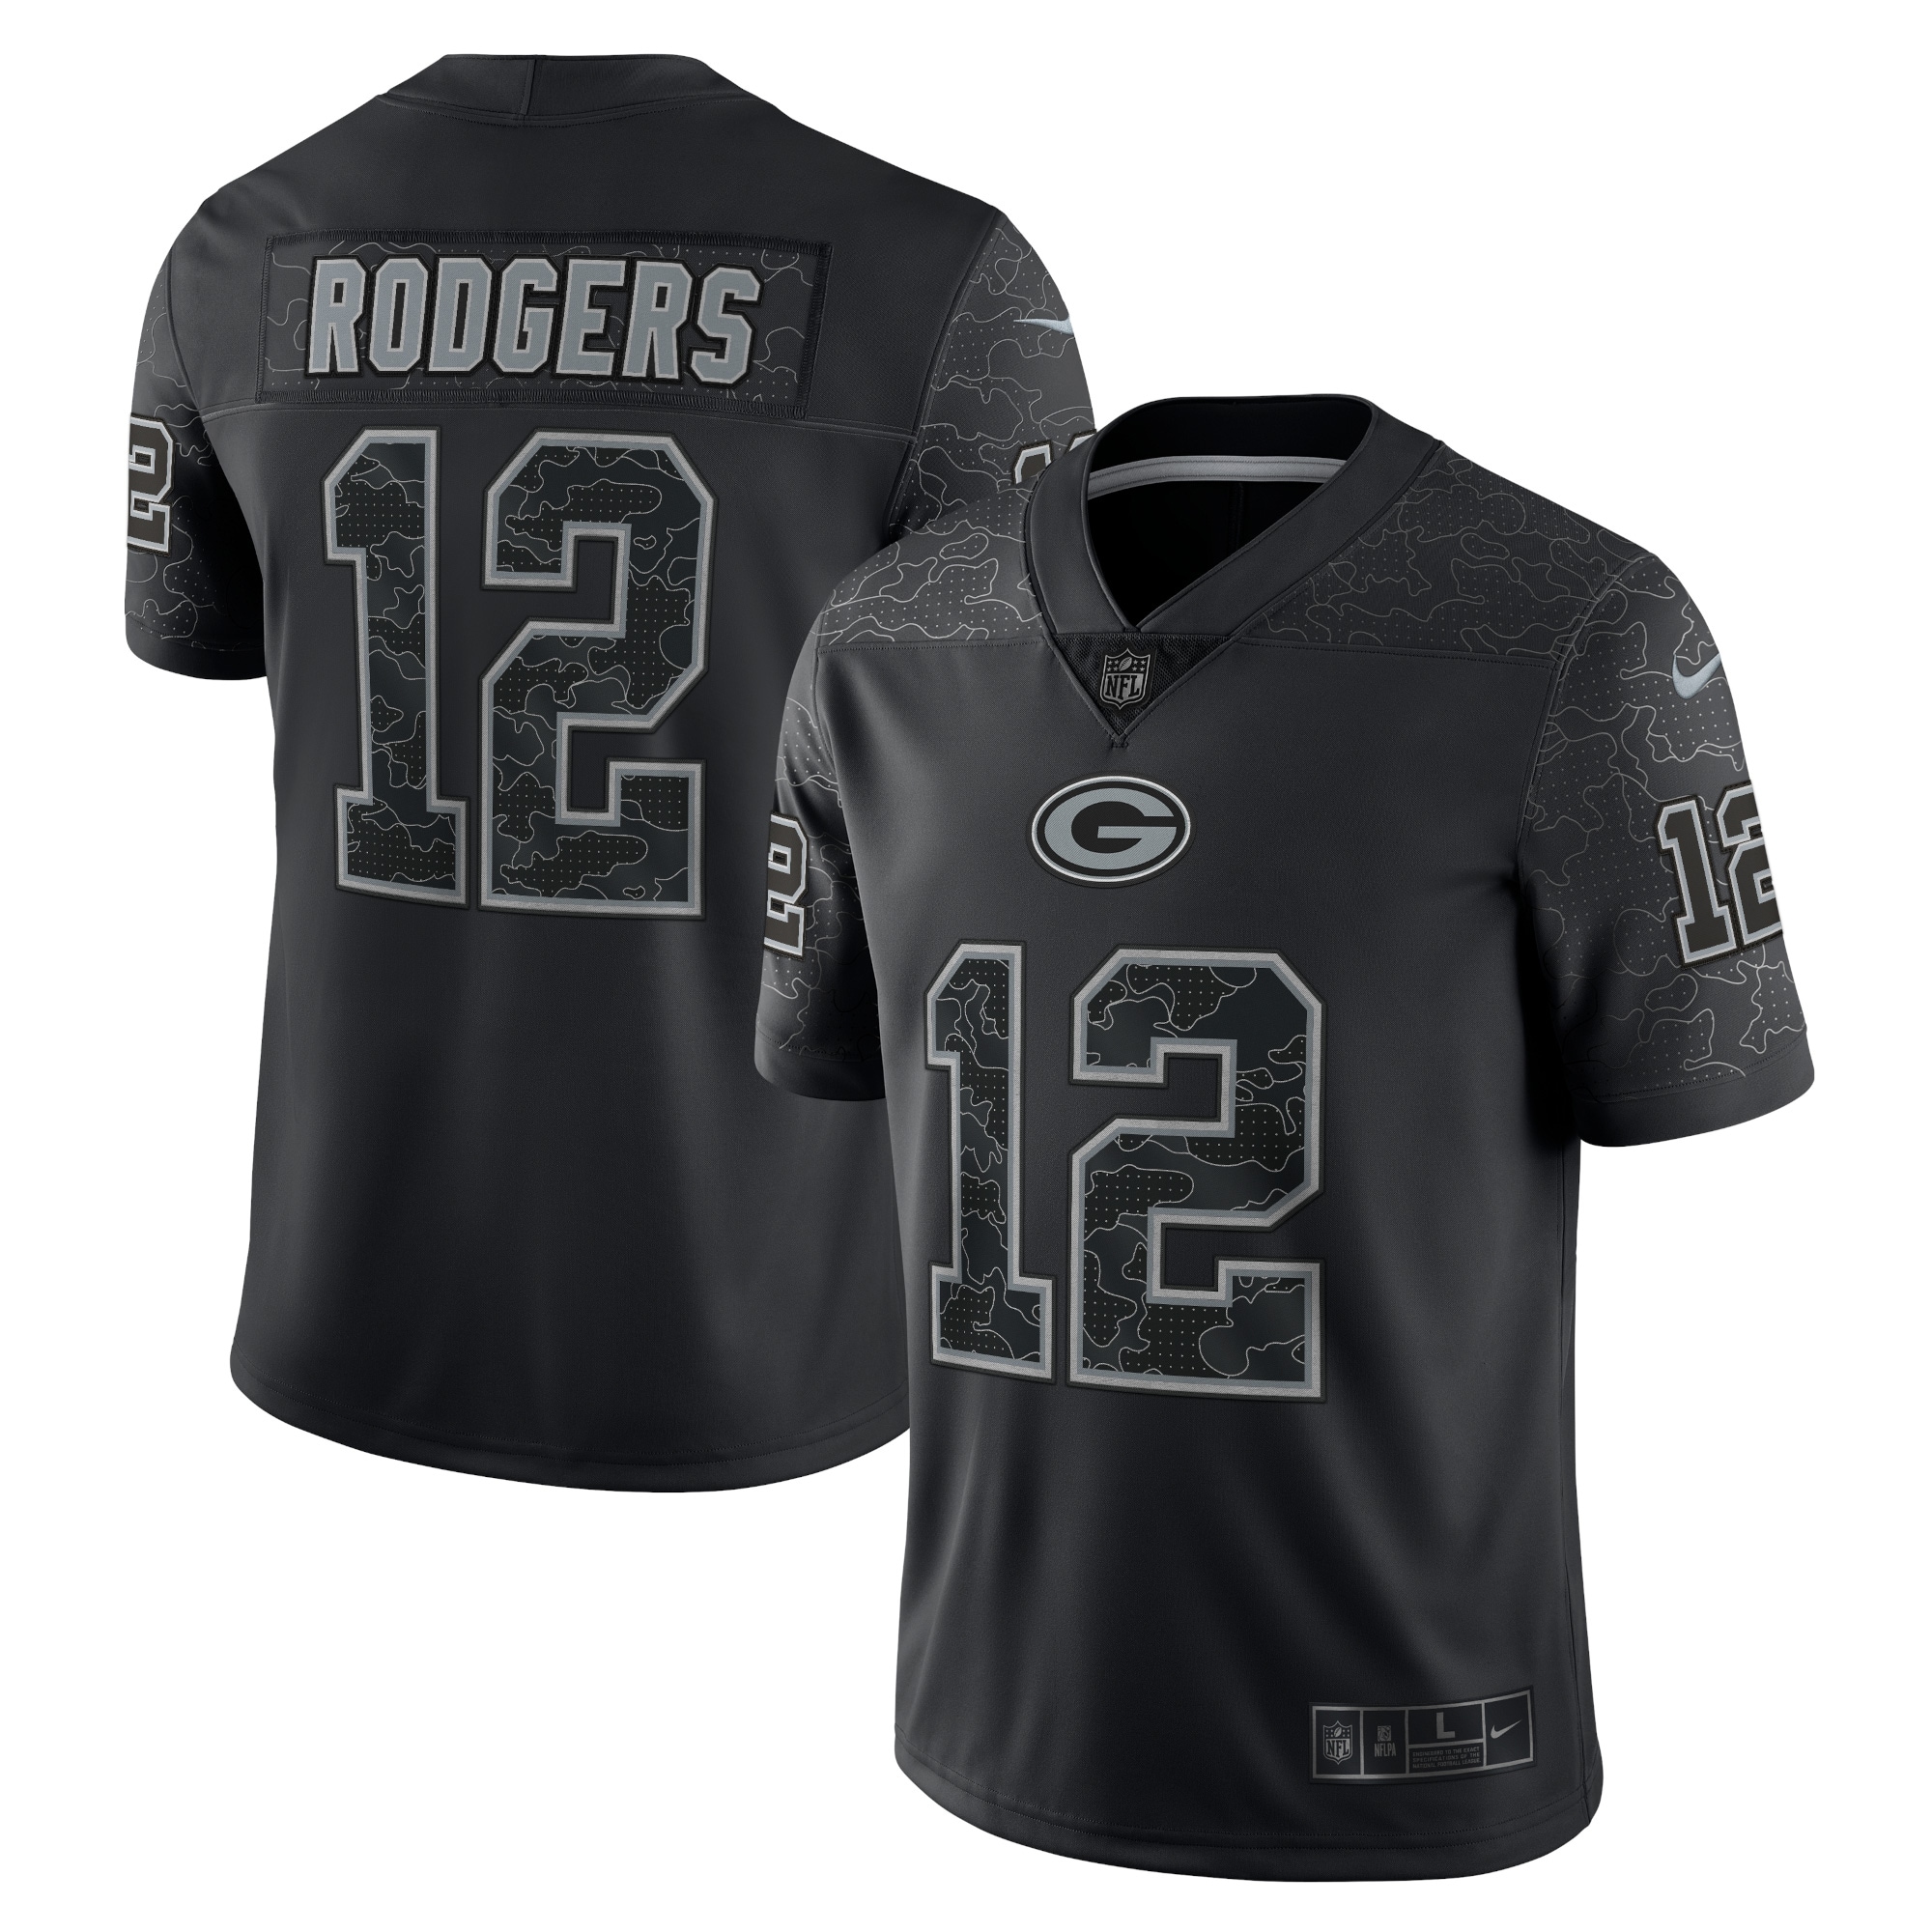 Men's Green Bay Packers Jerseys Black Aaron Rodgers RFLCTV Limited Style